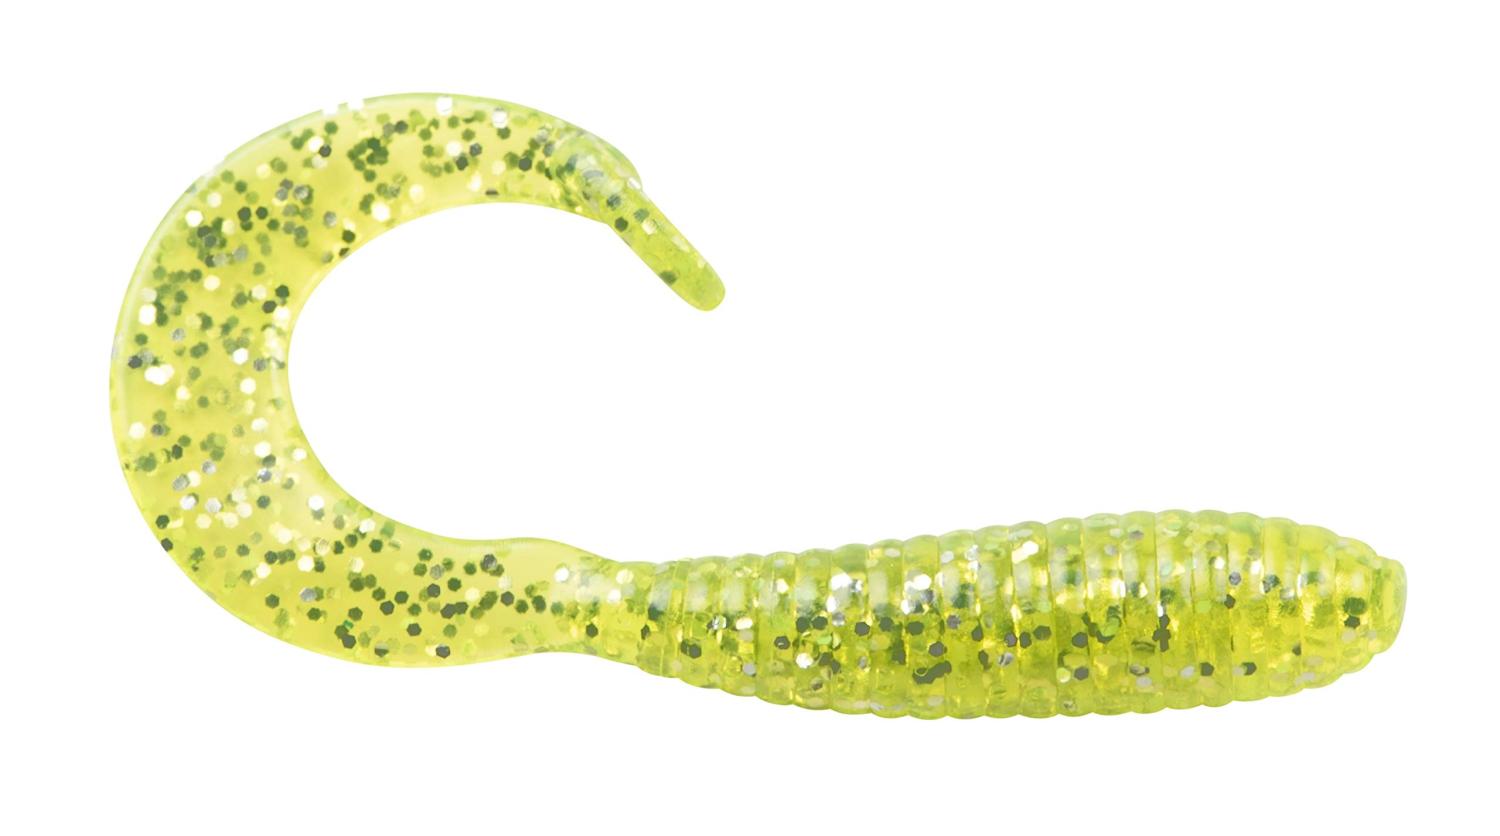 Bobby Garland Hyper Grub Curly-Tail Swim-Bait Crappie Fishing Lure, 2  Inches, Pack of 18 Chartreuse Silver